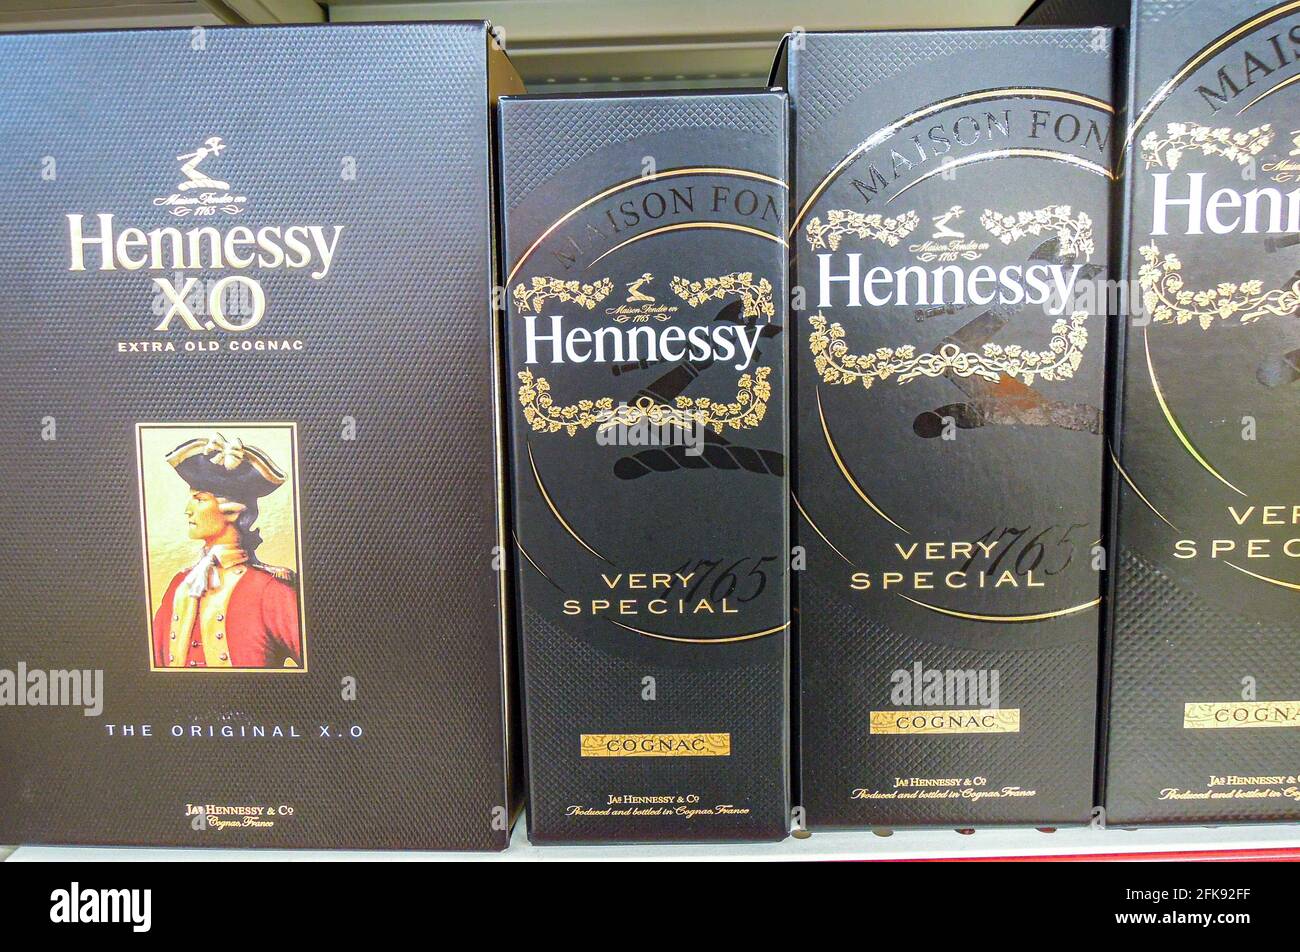 Samara, Russia - March 21, 2020: Hennessy cognac ready for sale on the shelves in supermarket. Various bottled alcoholic beverages Stock Photo